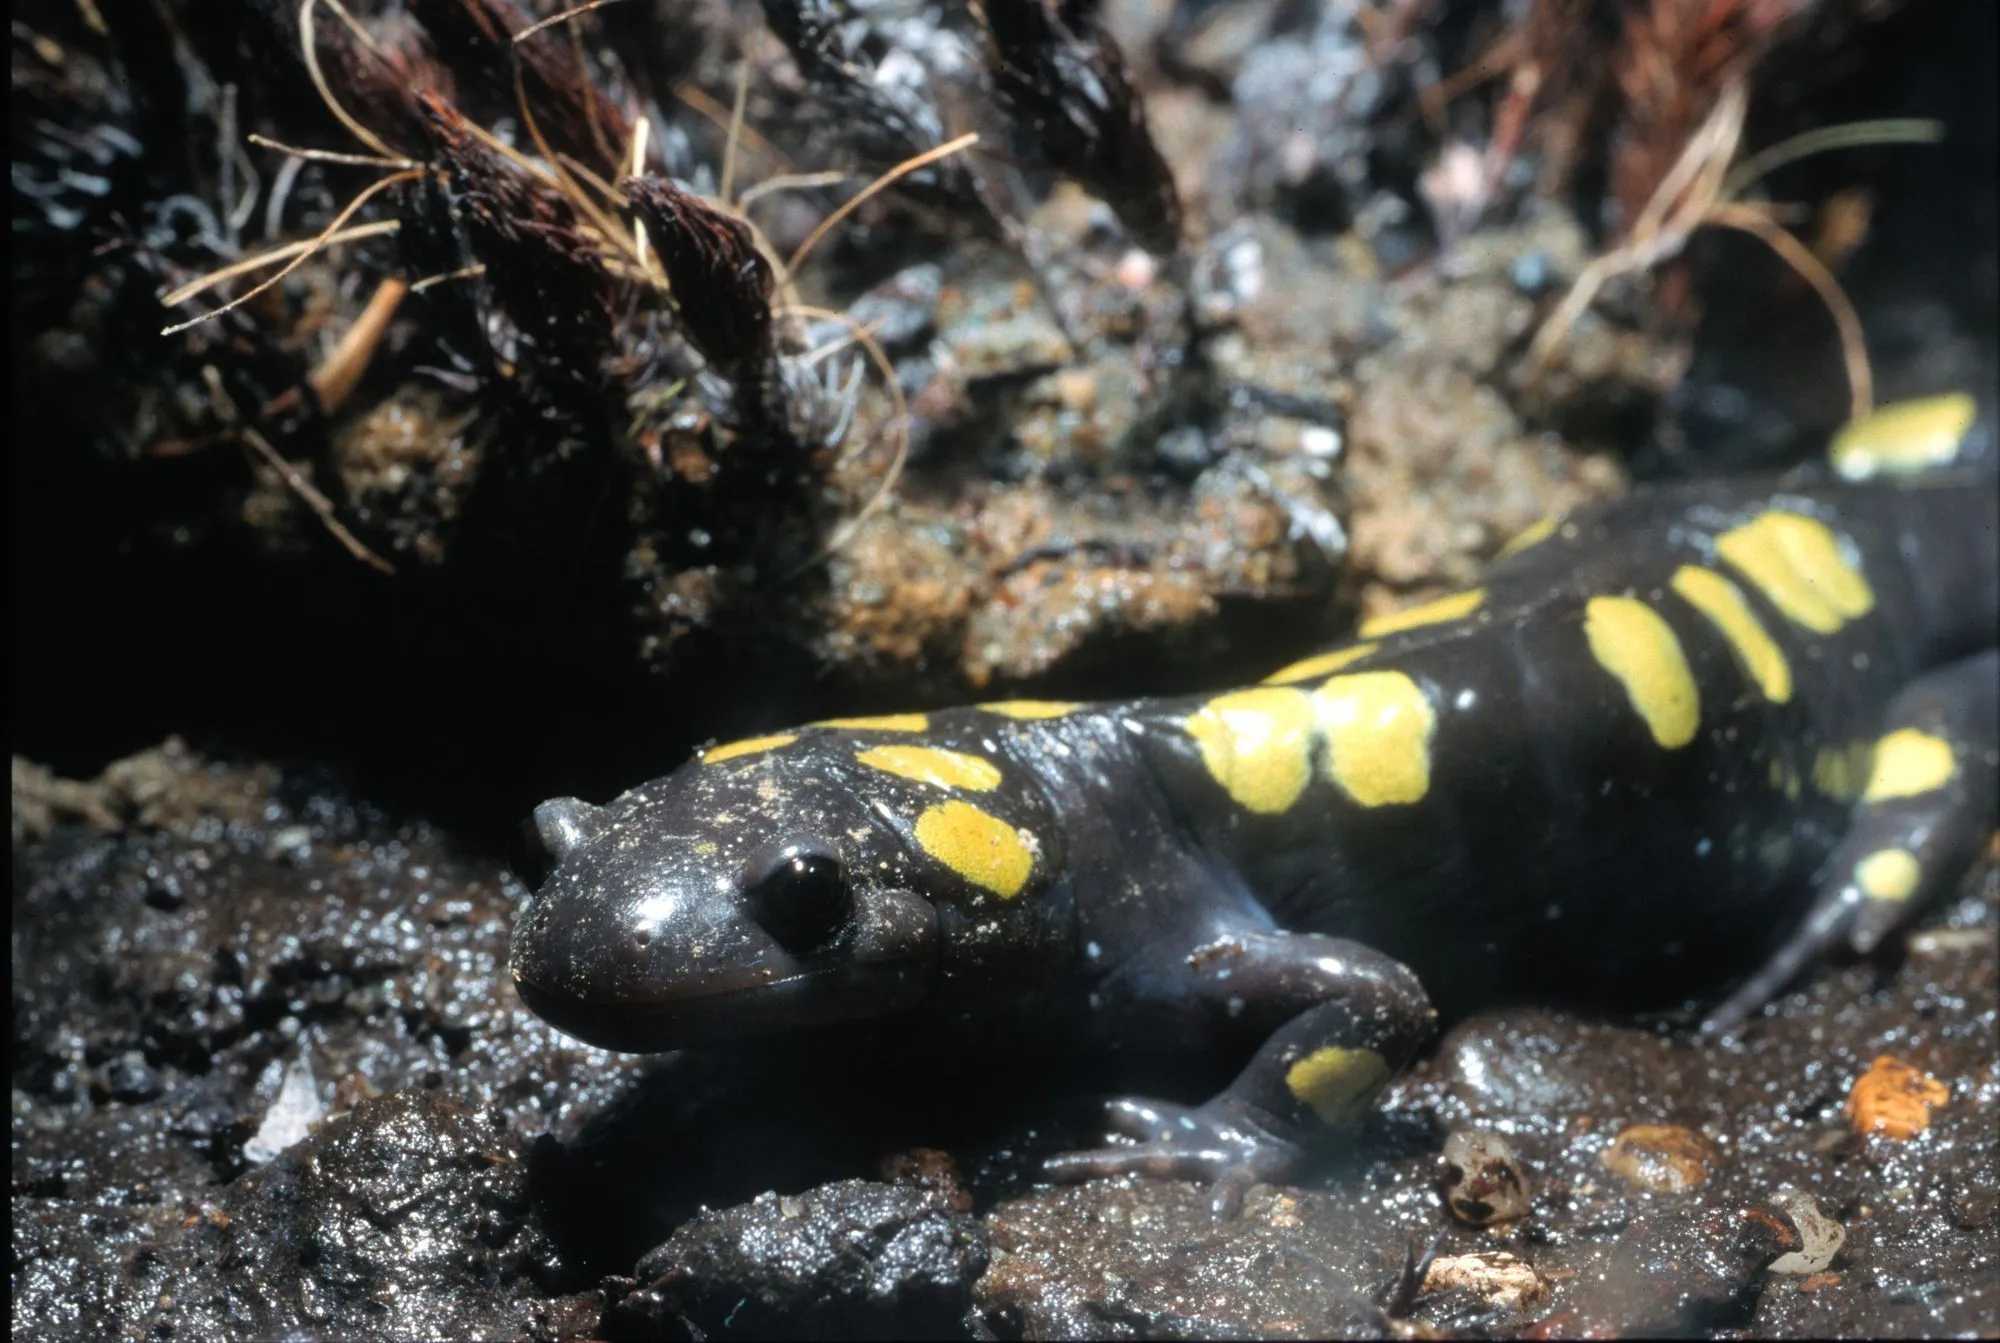 The fire salamander is often confused with the yellow-spotted salamander.